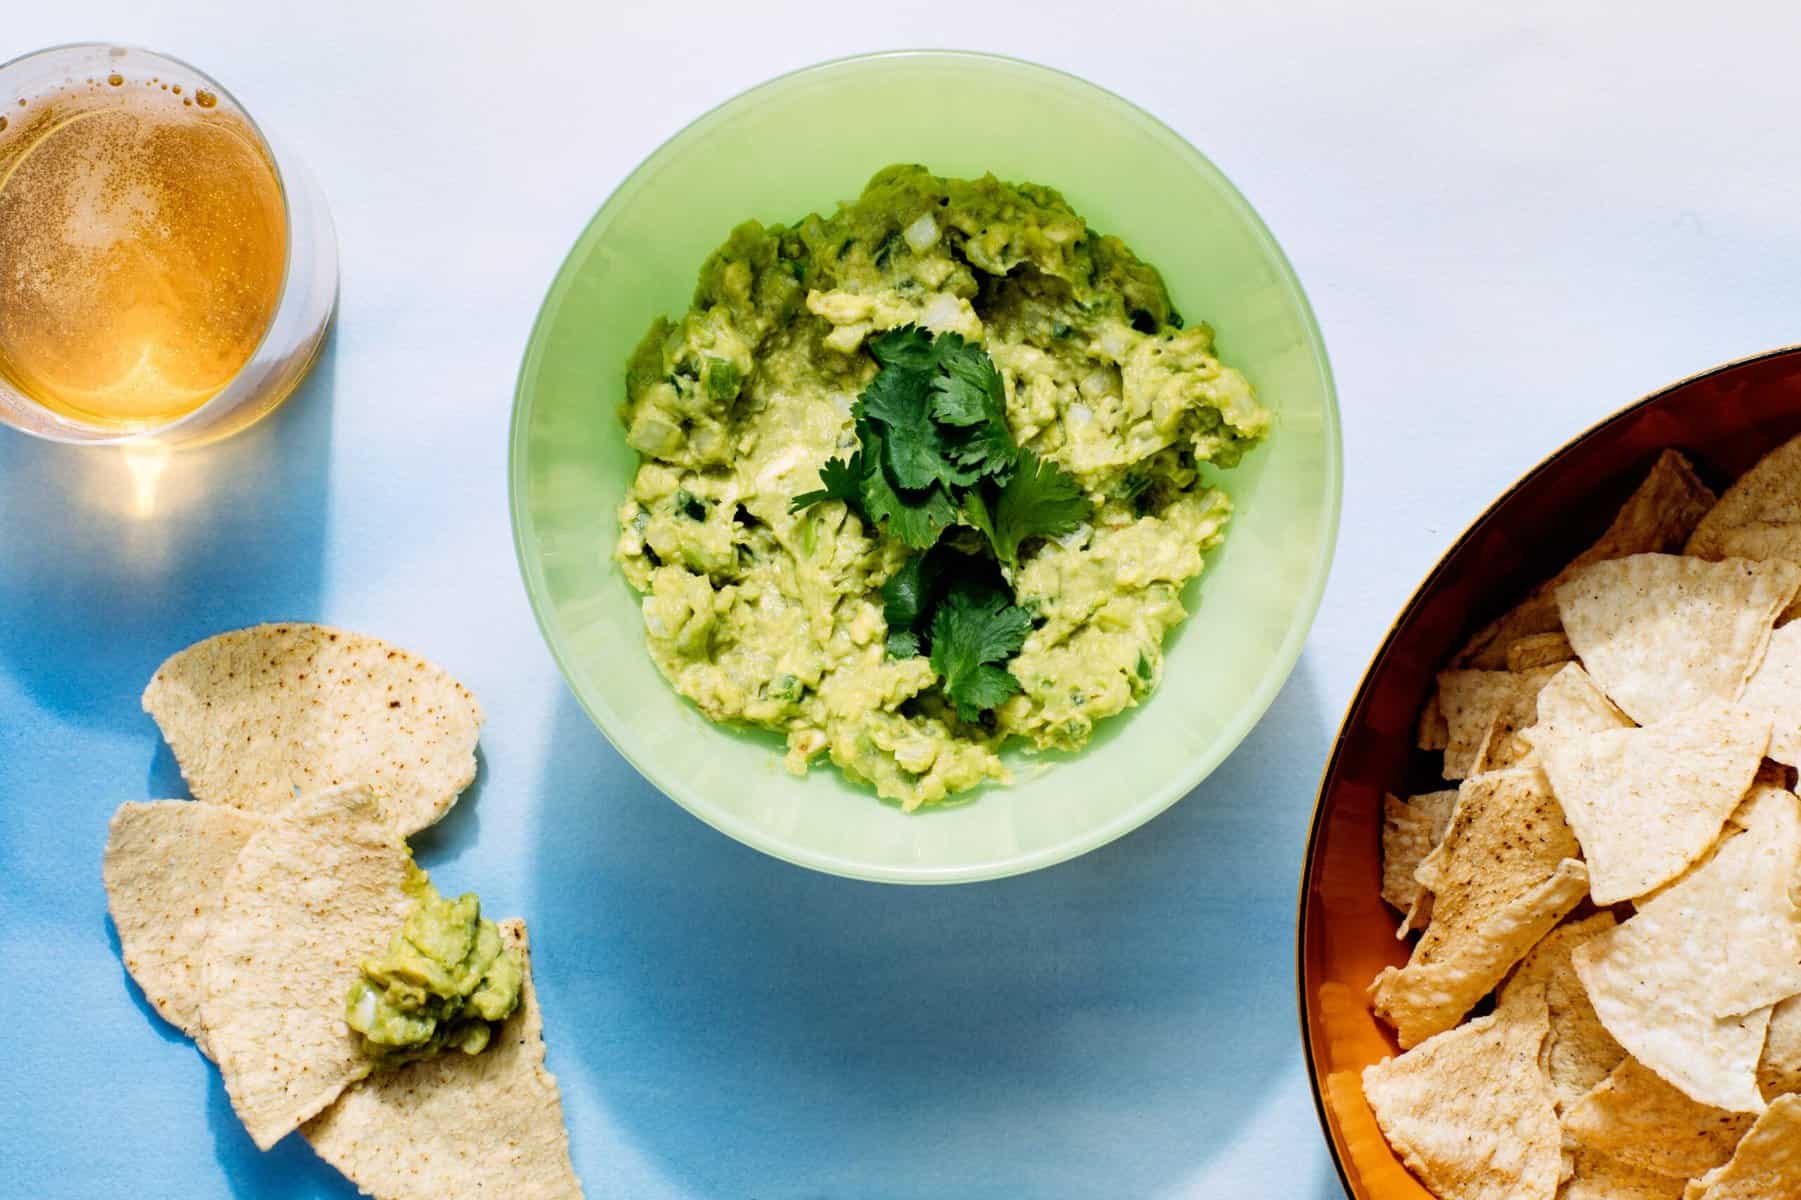  Bright greens and vibrant reds make this guacamole a feast for the eyes as well as the mouth.